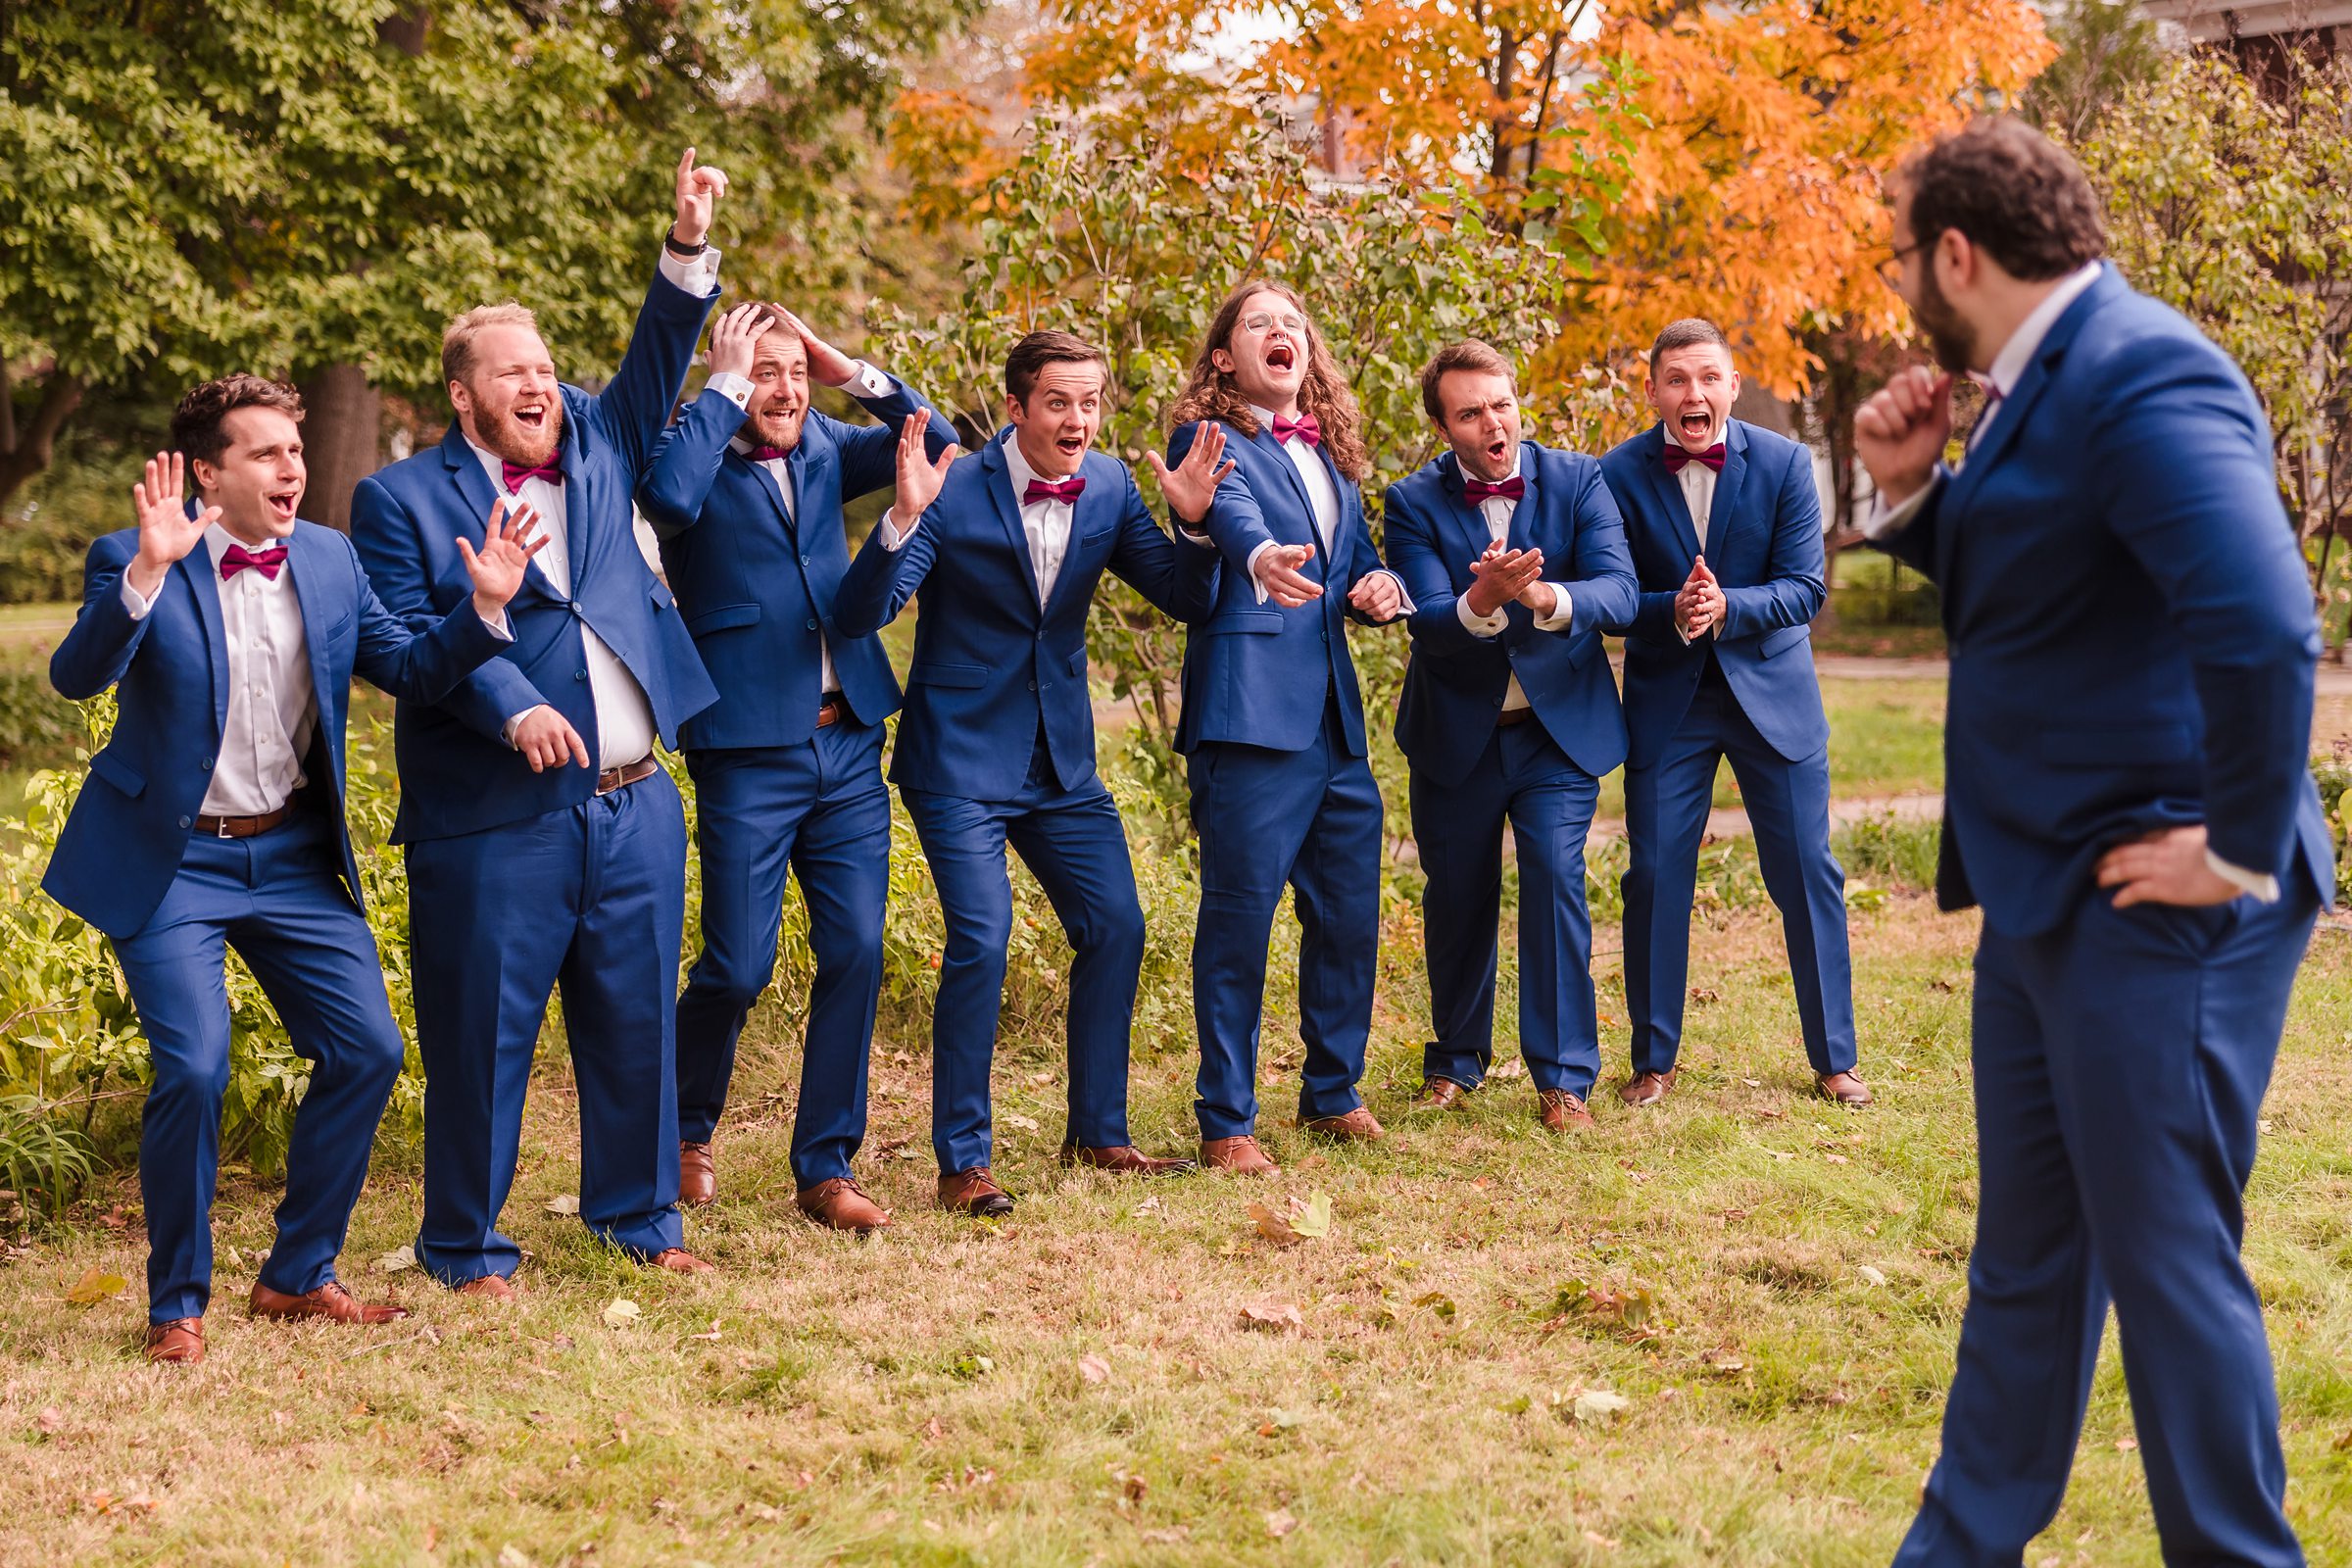 Groomsmen get excited to see the groom during a wedding at the Hotel Pere Marquette in Peoria, Illinois.